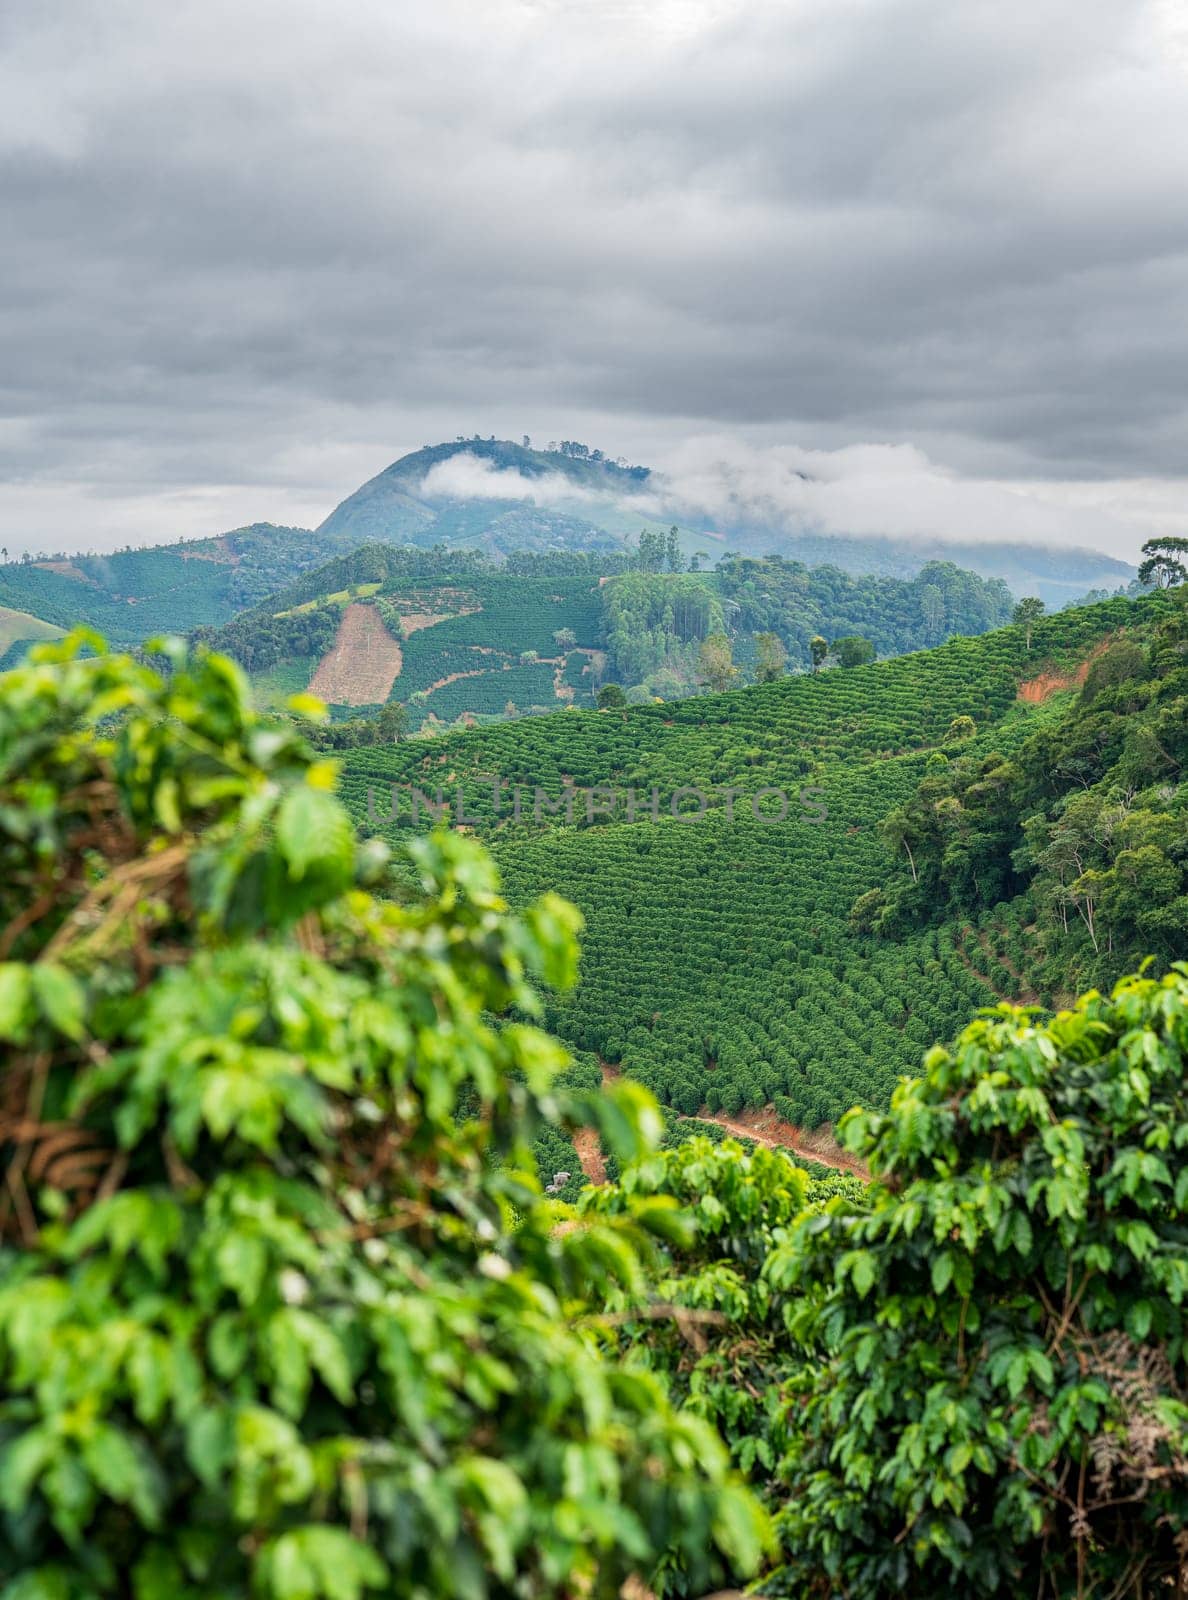 Lush Green Coffee Fields in the Mountains with Misty Sky by FerradalFCG